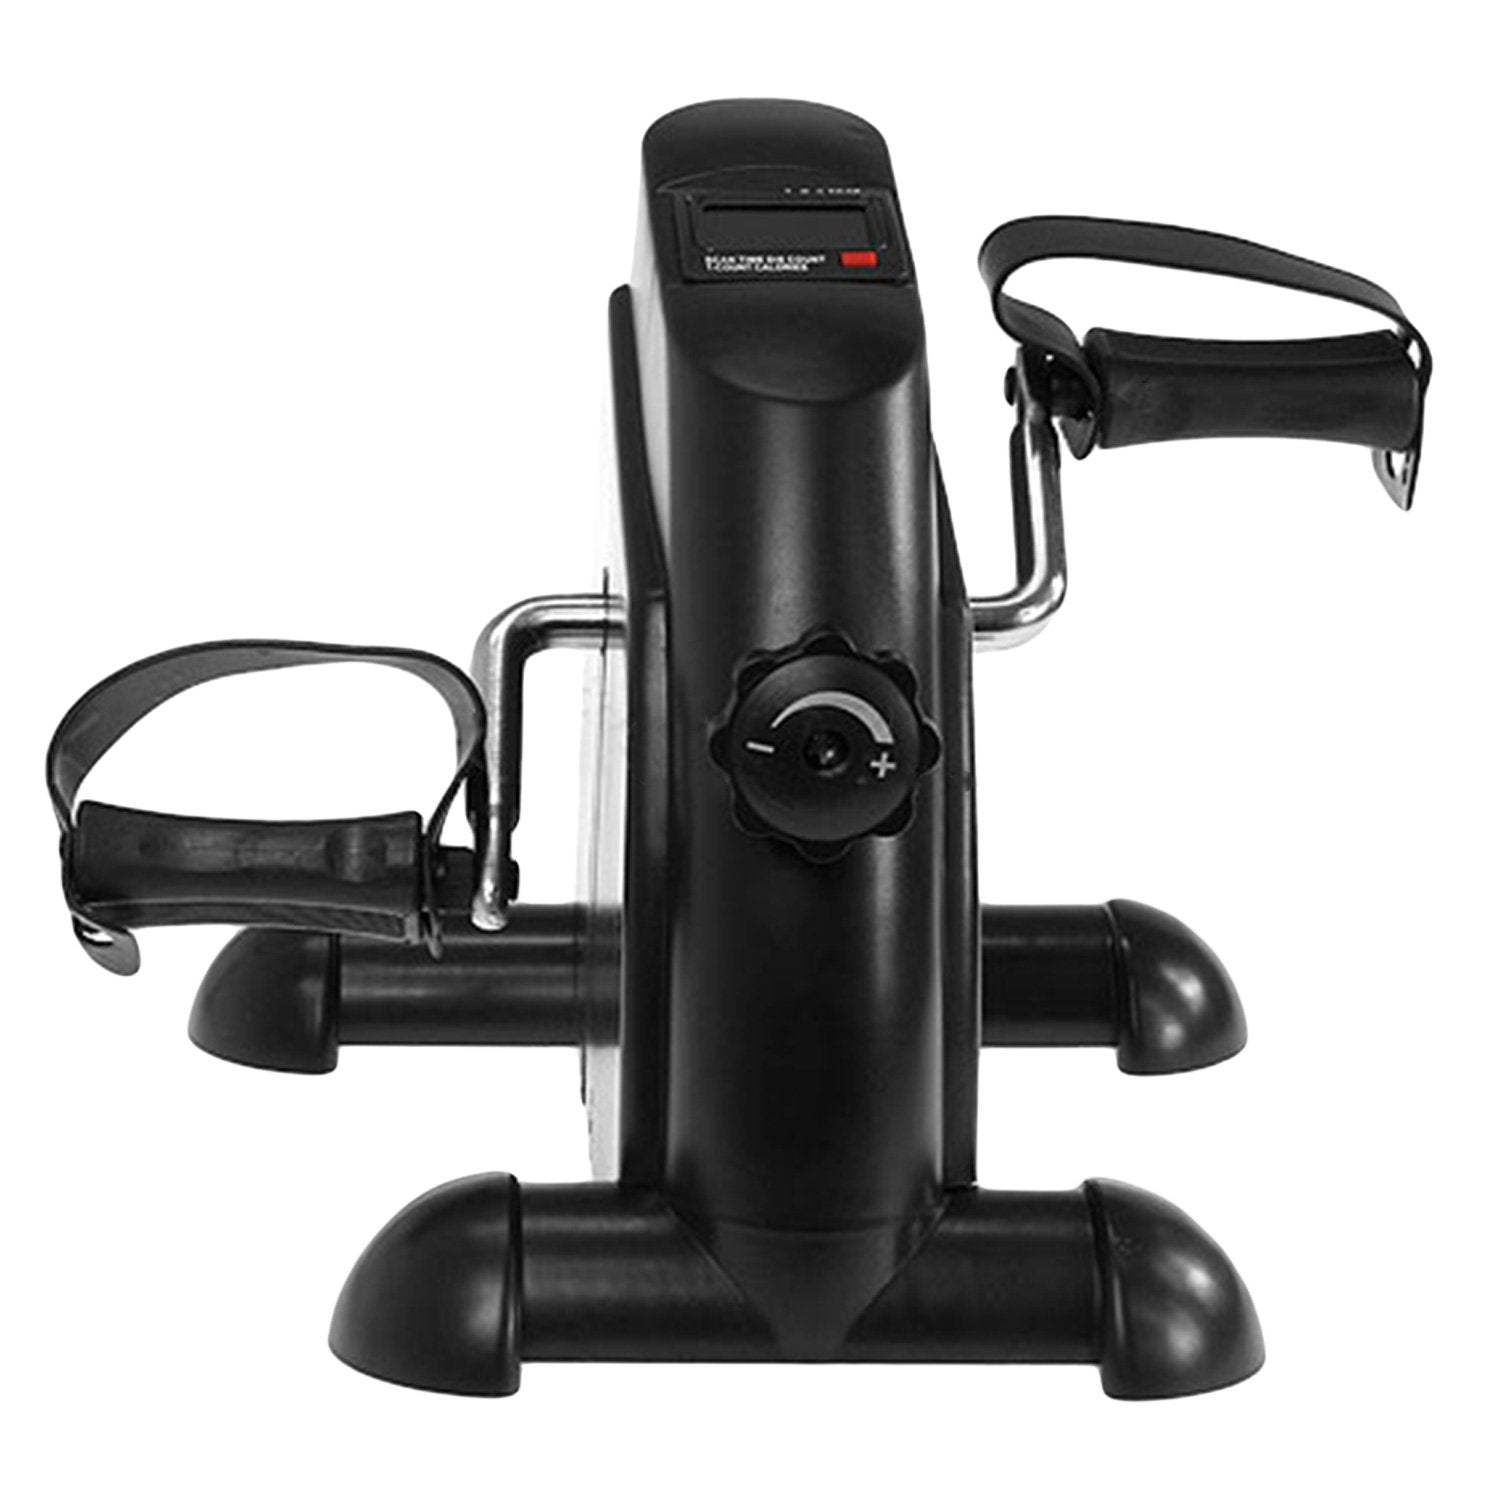 Powertrain Mini Exercise Bike for Arms and Legs - SILBERSHELL